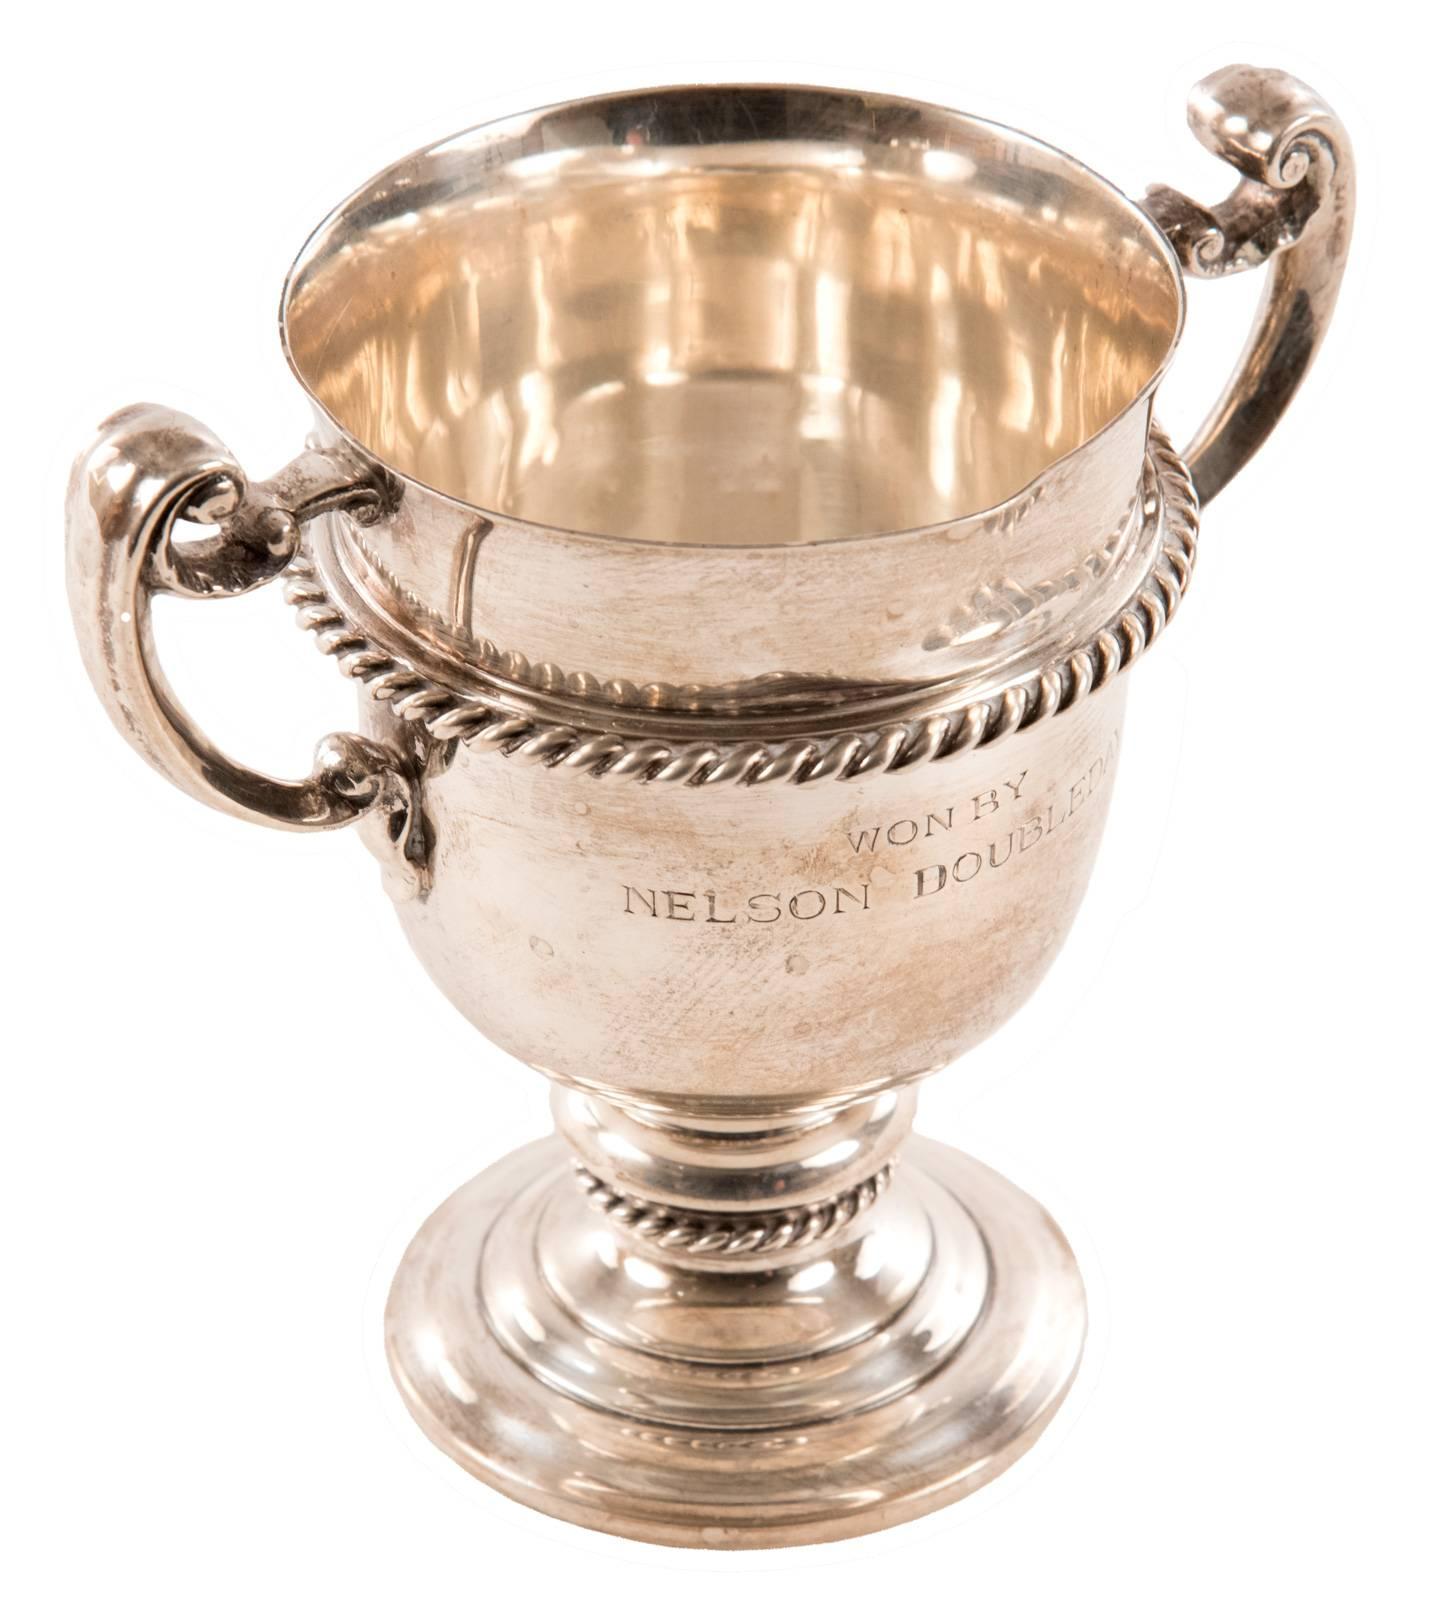 American Sterling Silver Golfing Trophy Cup Awarded to Nelson Doubleday